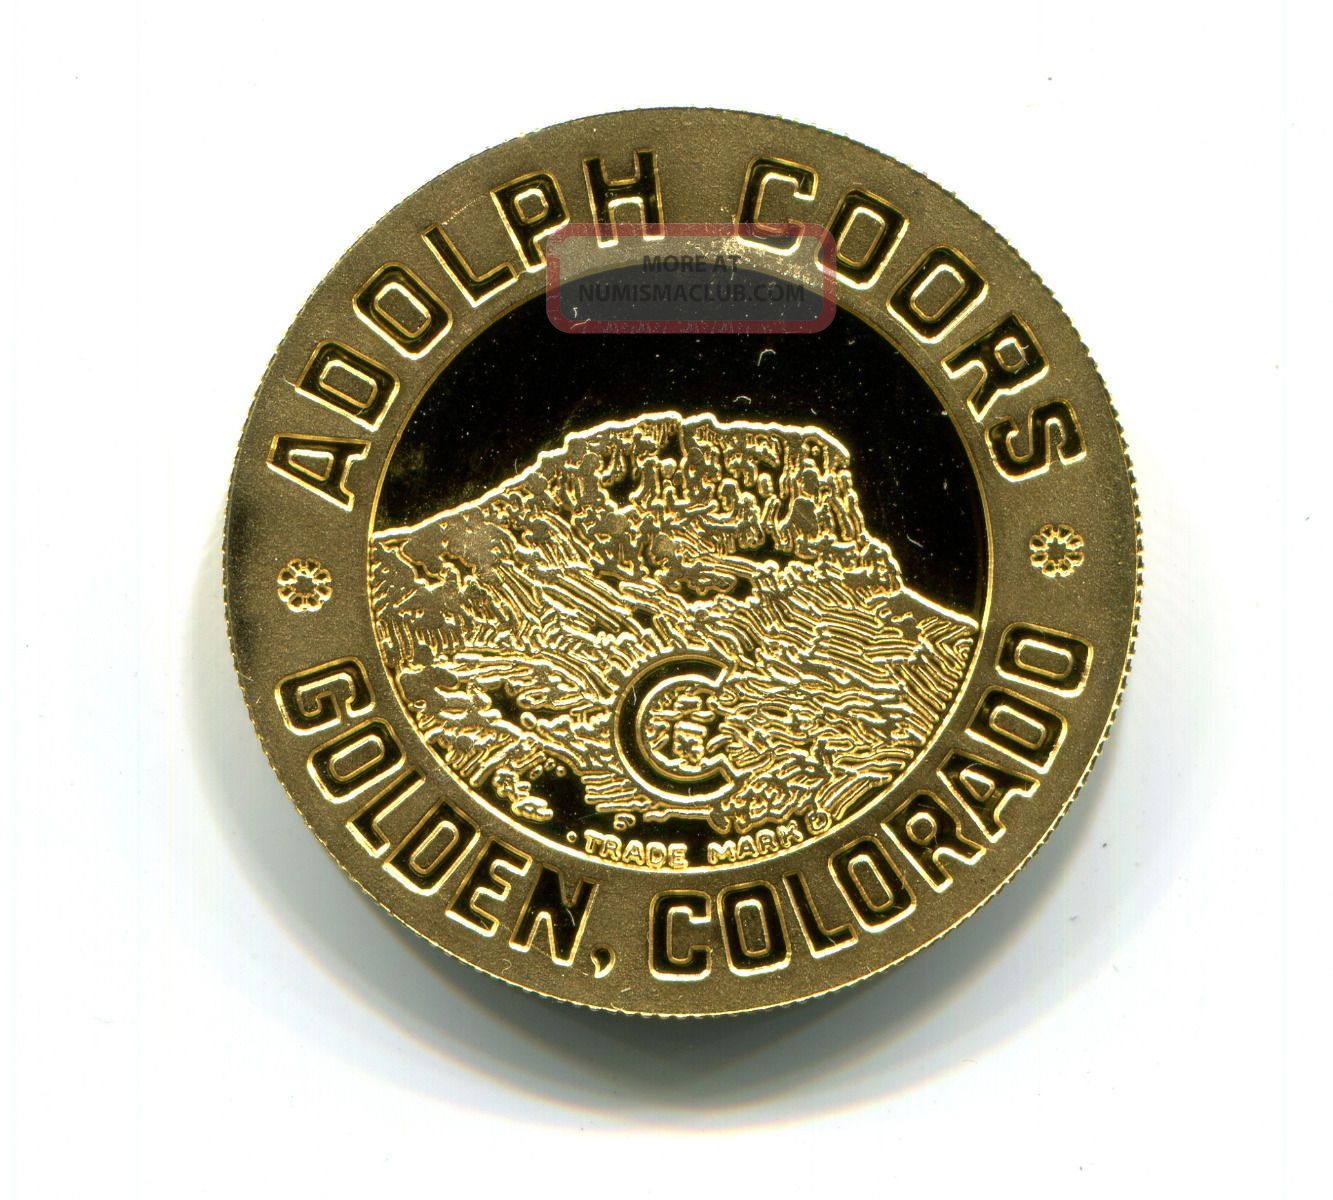 Adolph Coors 1 Oz Gold Proof Round Golden Colorado Coors Beer